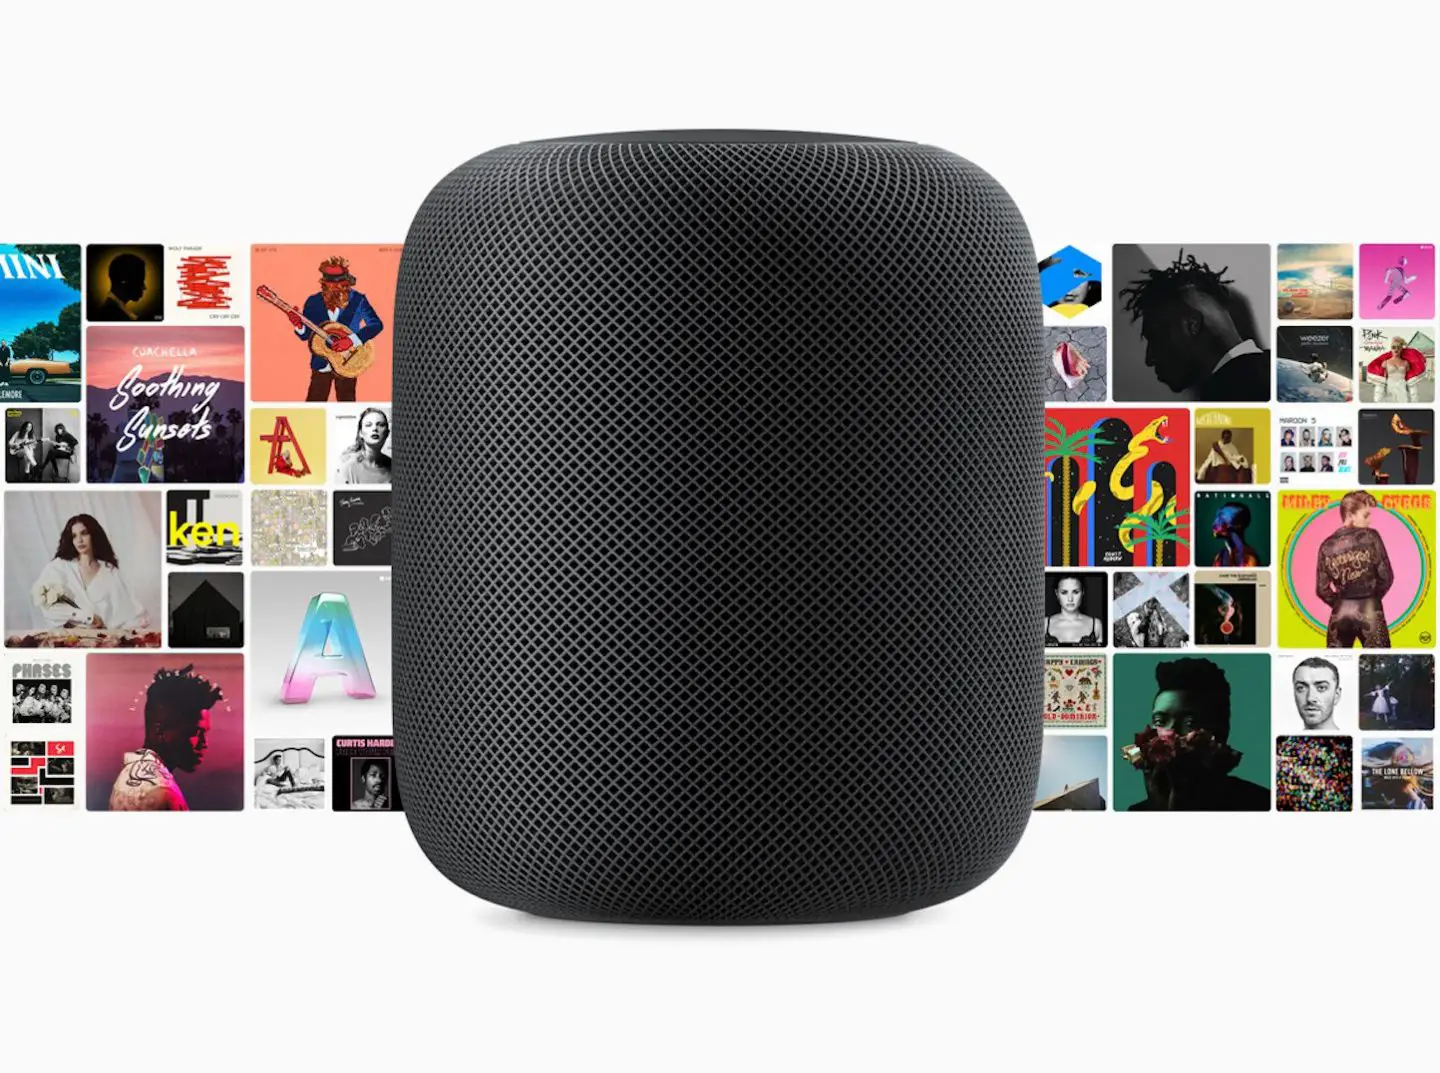 How to find iPhone with HomePod